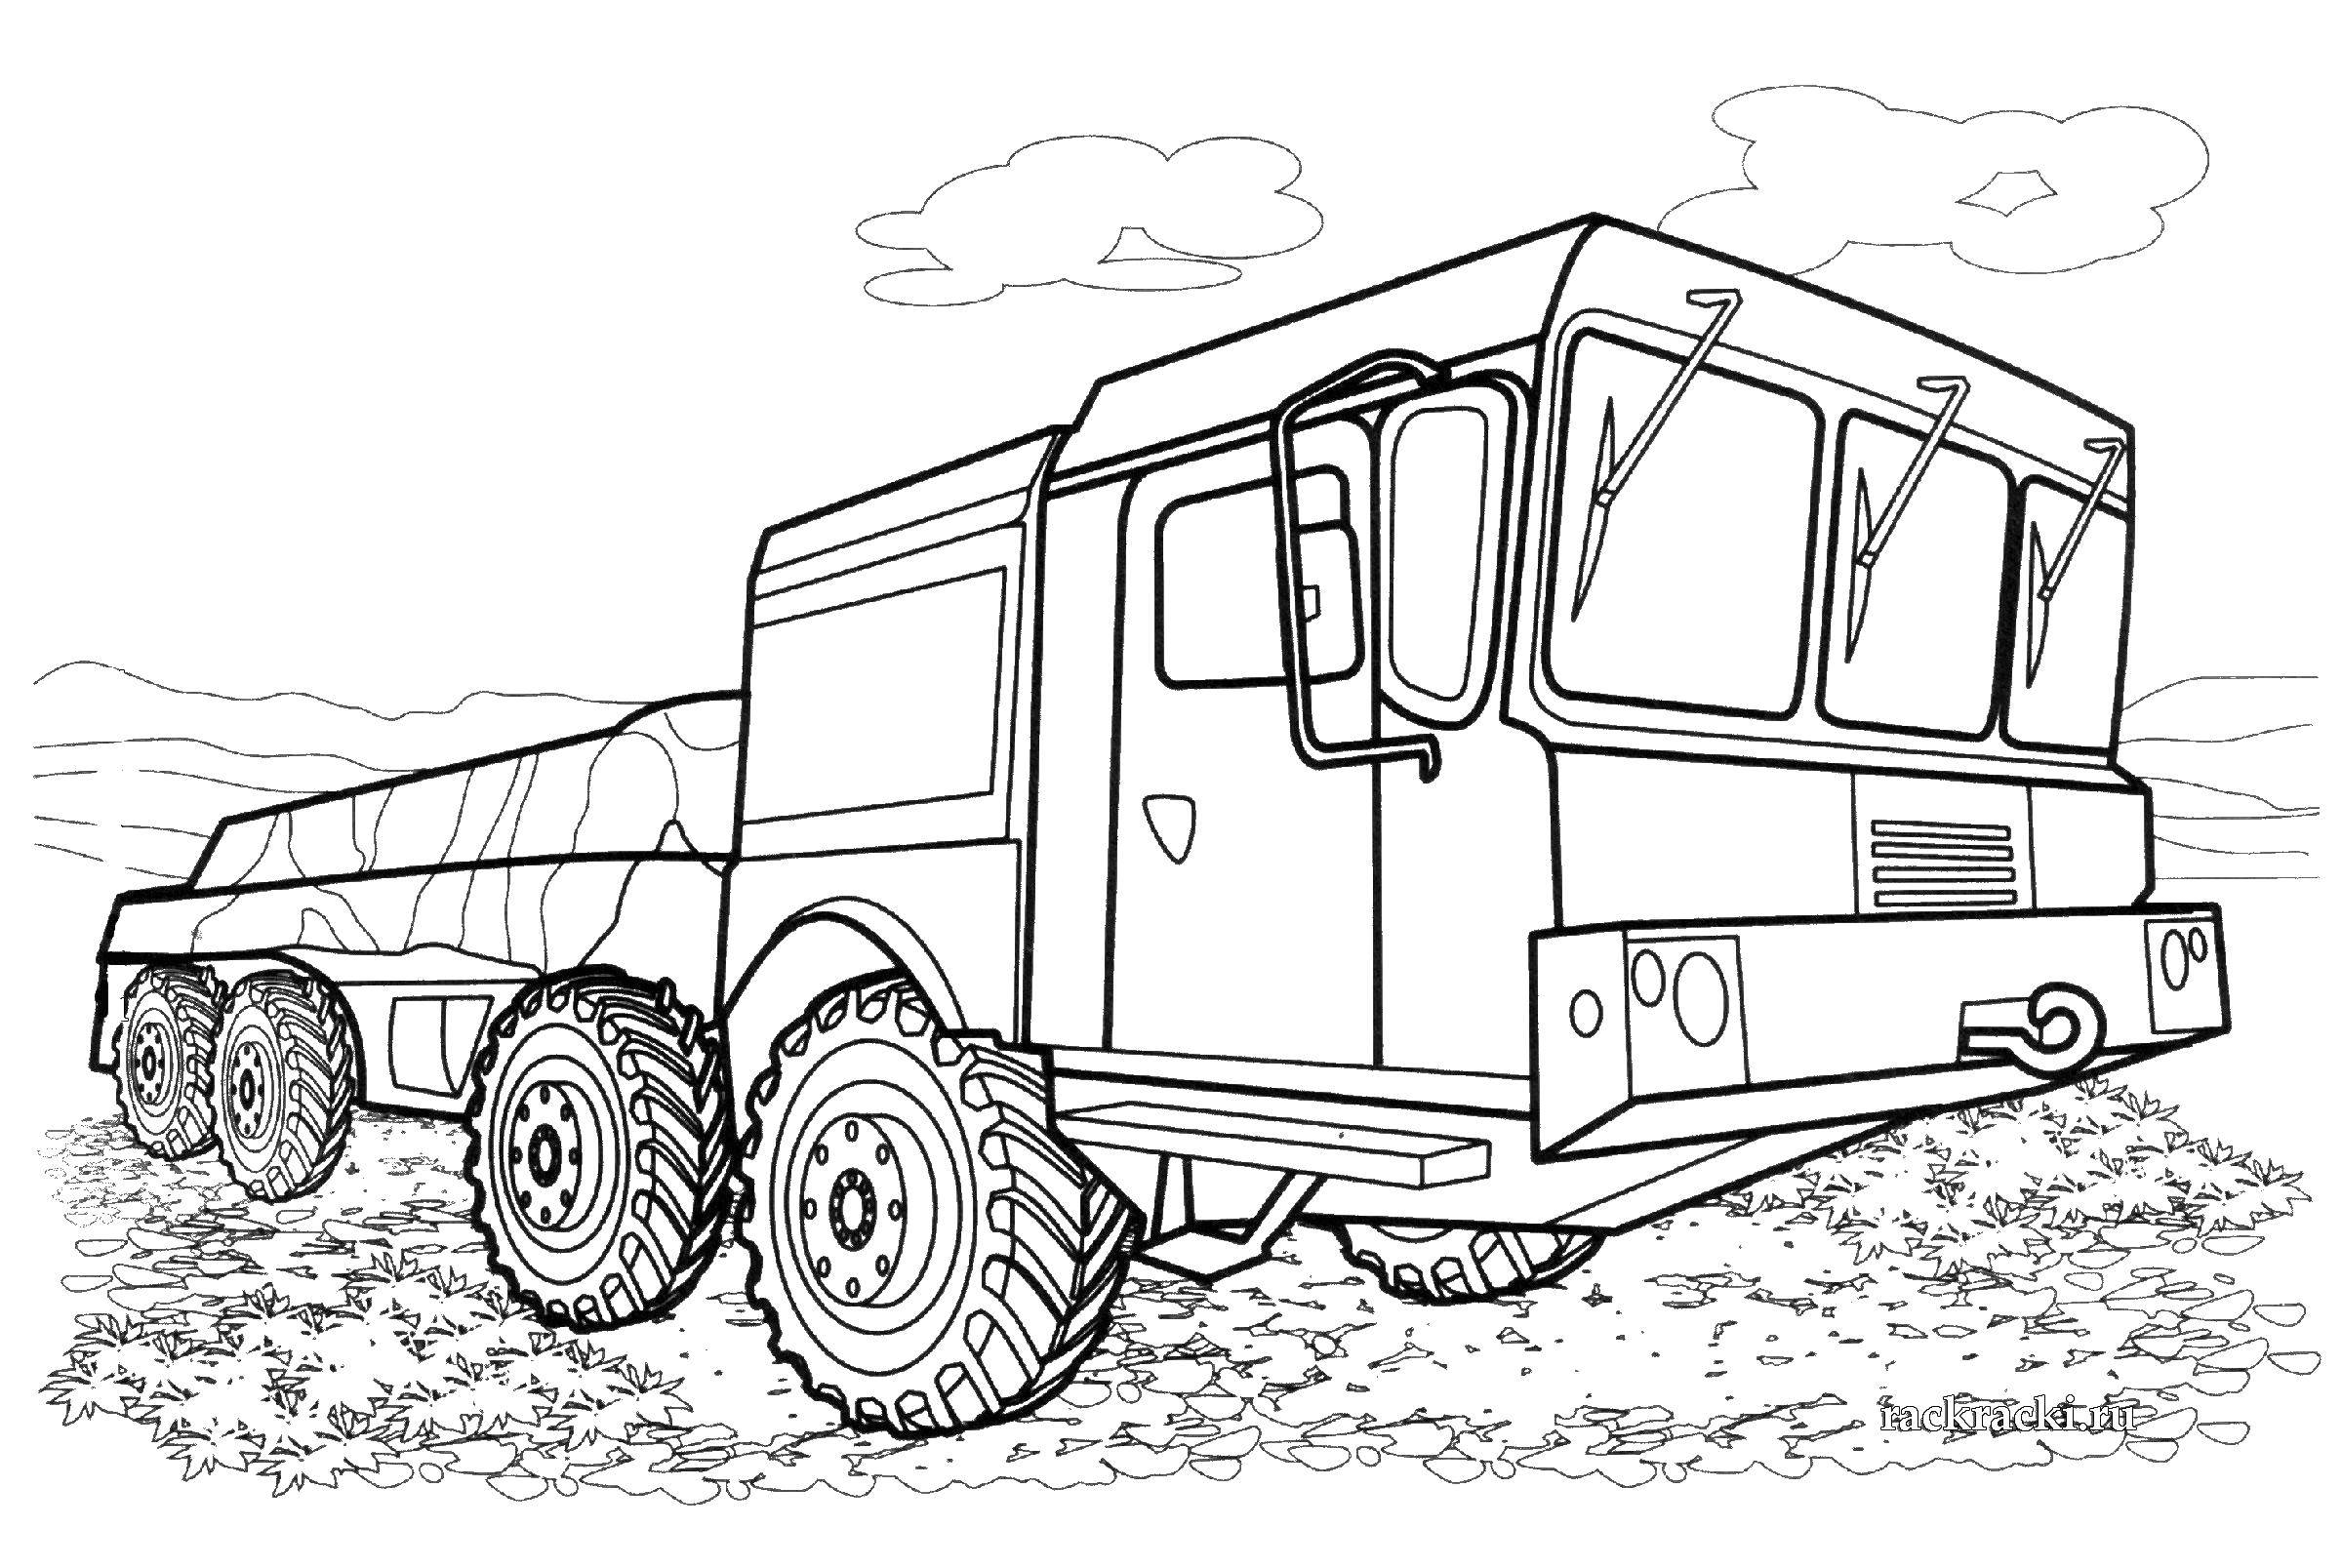 Coloring Military tankoos. Category military coloring pages. Tags:  Military, cars.